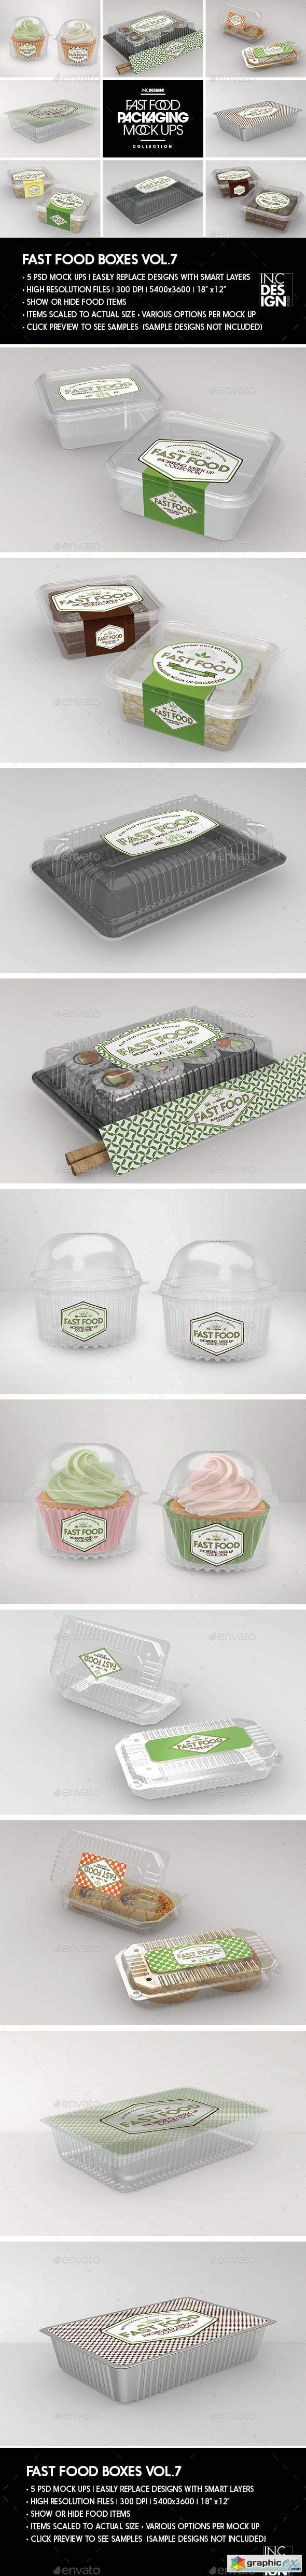 Fast Food Boxes Vol7Take Out Packaging Mock Ups